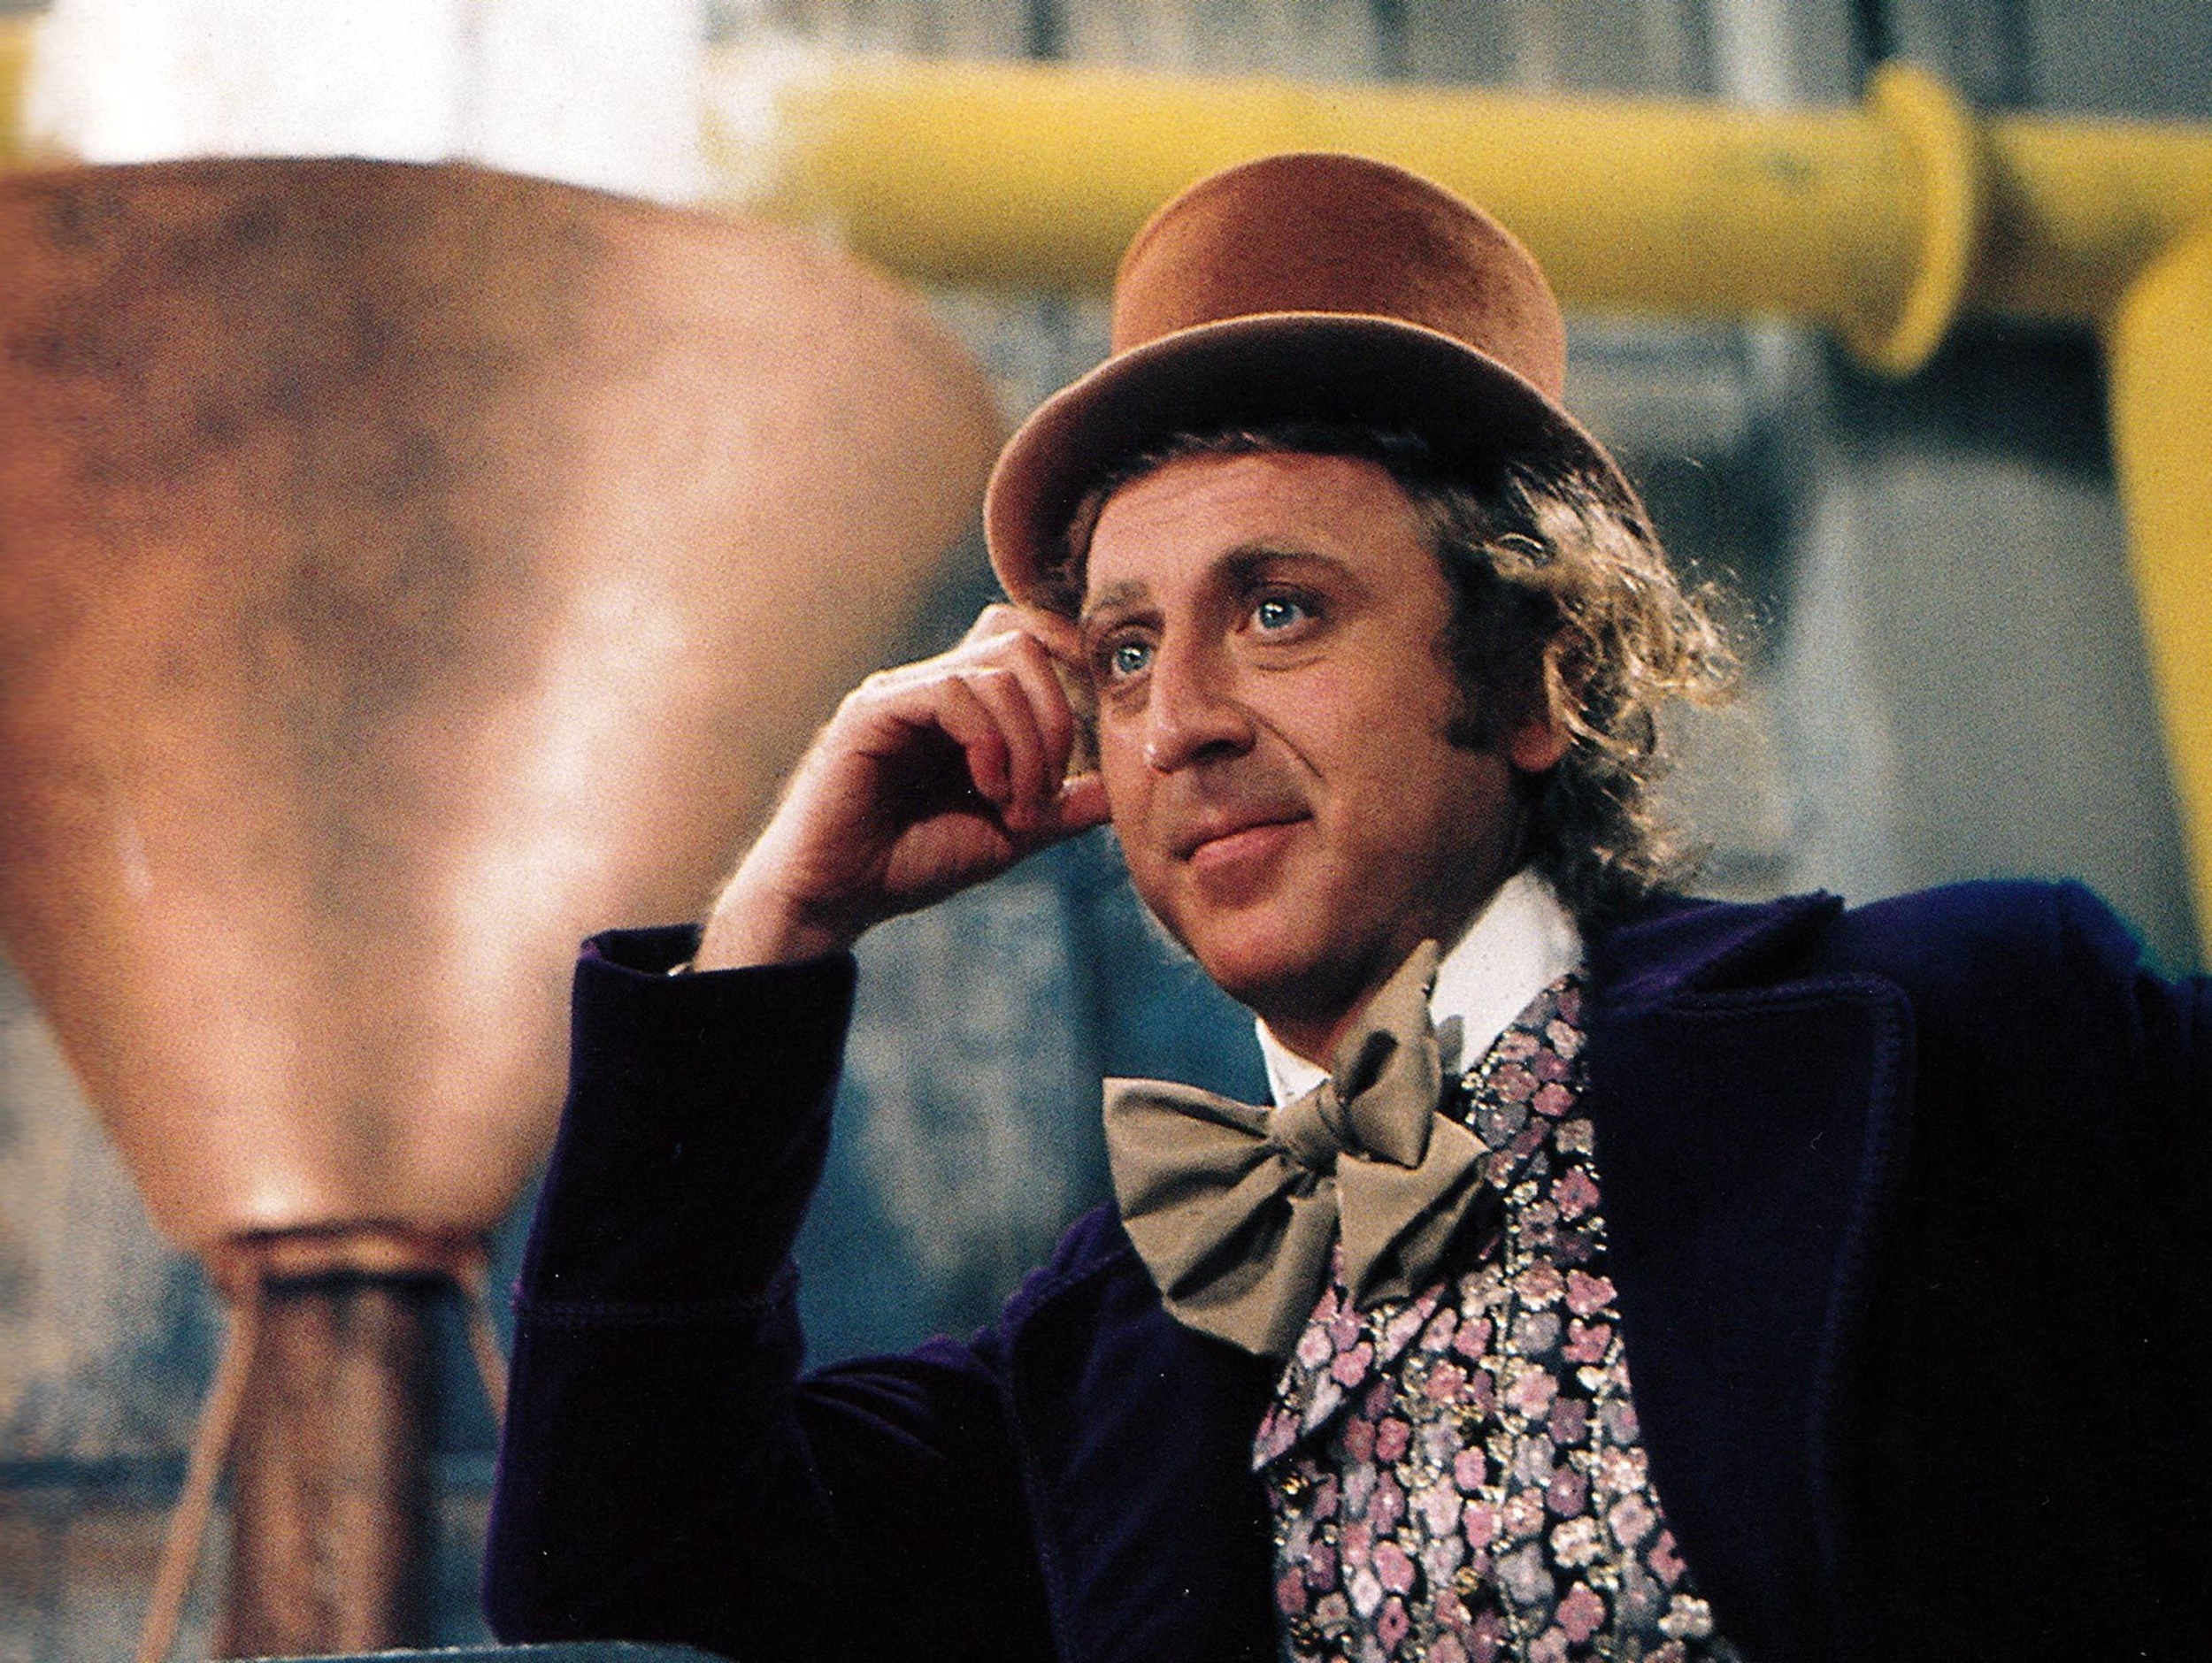 <p><em>Charlie and the Chocolate Factory</em> has been adapted to film twice now, and someday, it might get the movie treatment again. While most are partial to the first film adaptation of the story, we think both of them lived up to the whimsy and wonderment of Roald Dahl’s classic book. </p><p><a href='https://www.msn.com/en-us/community/channel/vid-cj9pqbr0vn9in2b6ddcd8sfgpfq6x6utp44fssrv6mc2gtybw0us'>Follow us on MSN to see more of our exclusive entertainment content.</a></p>